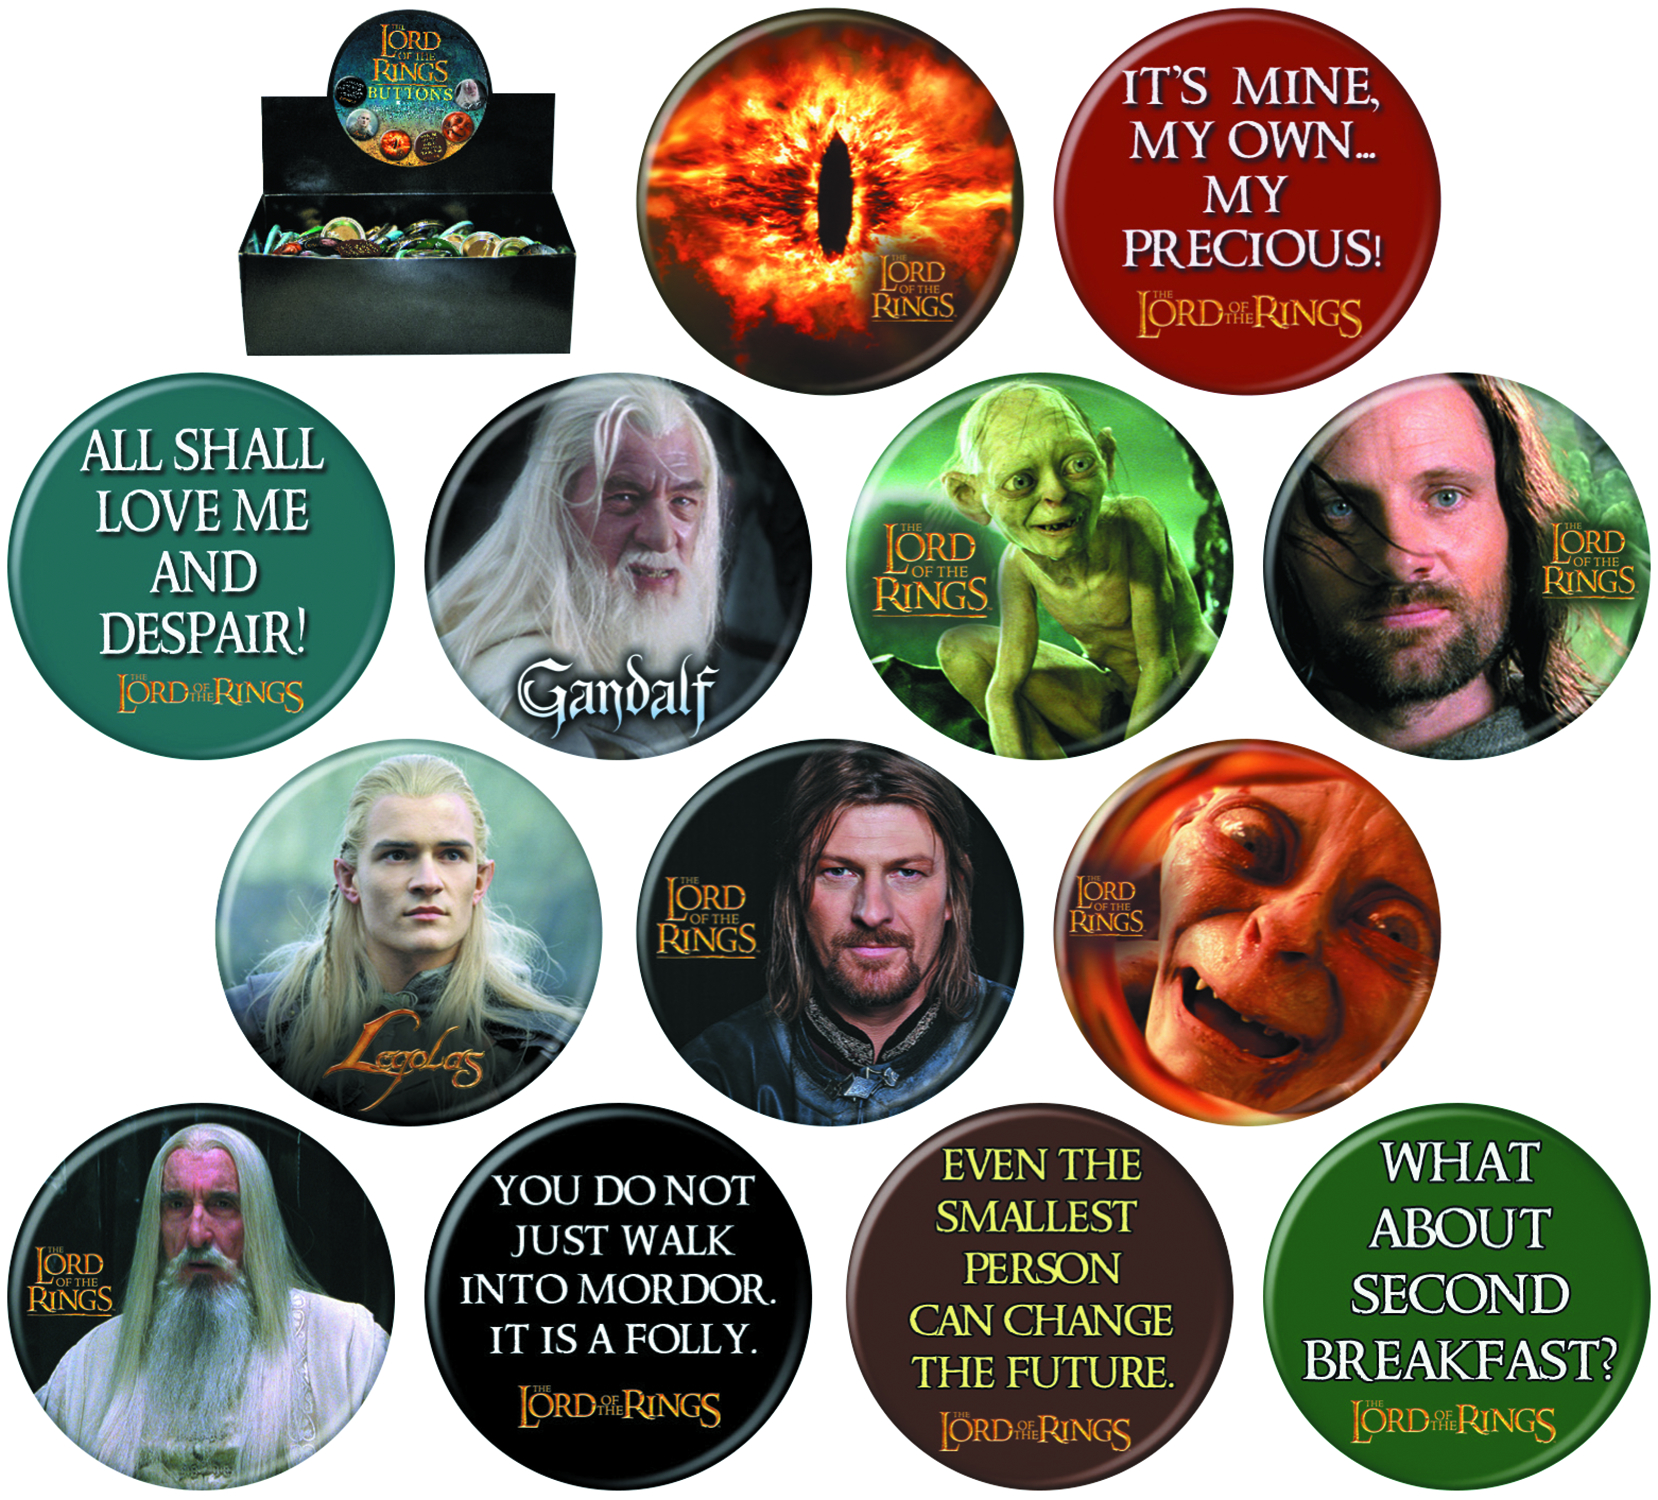 Lord of the Rings character names